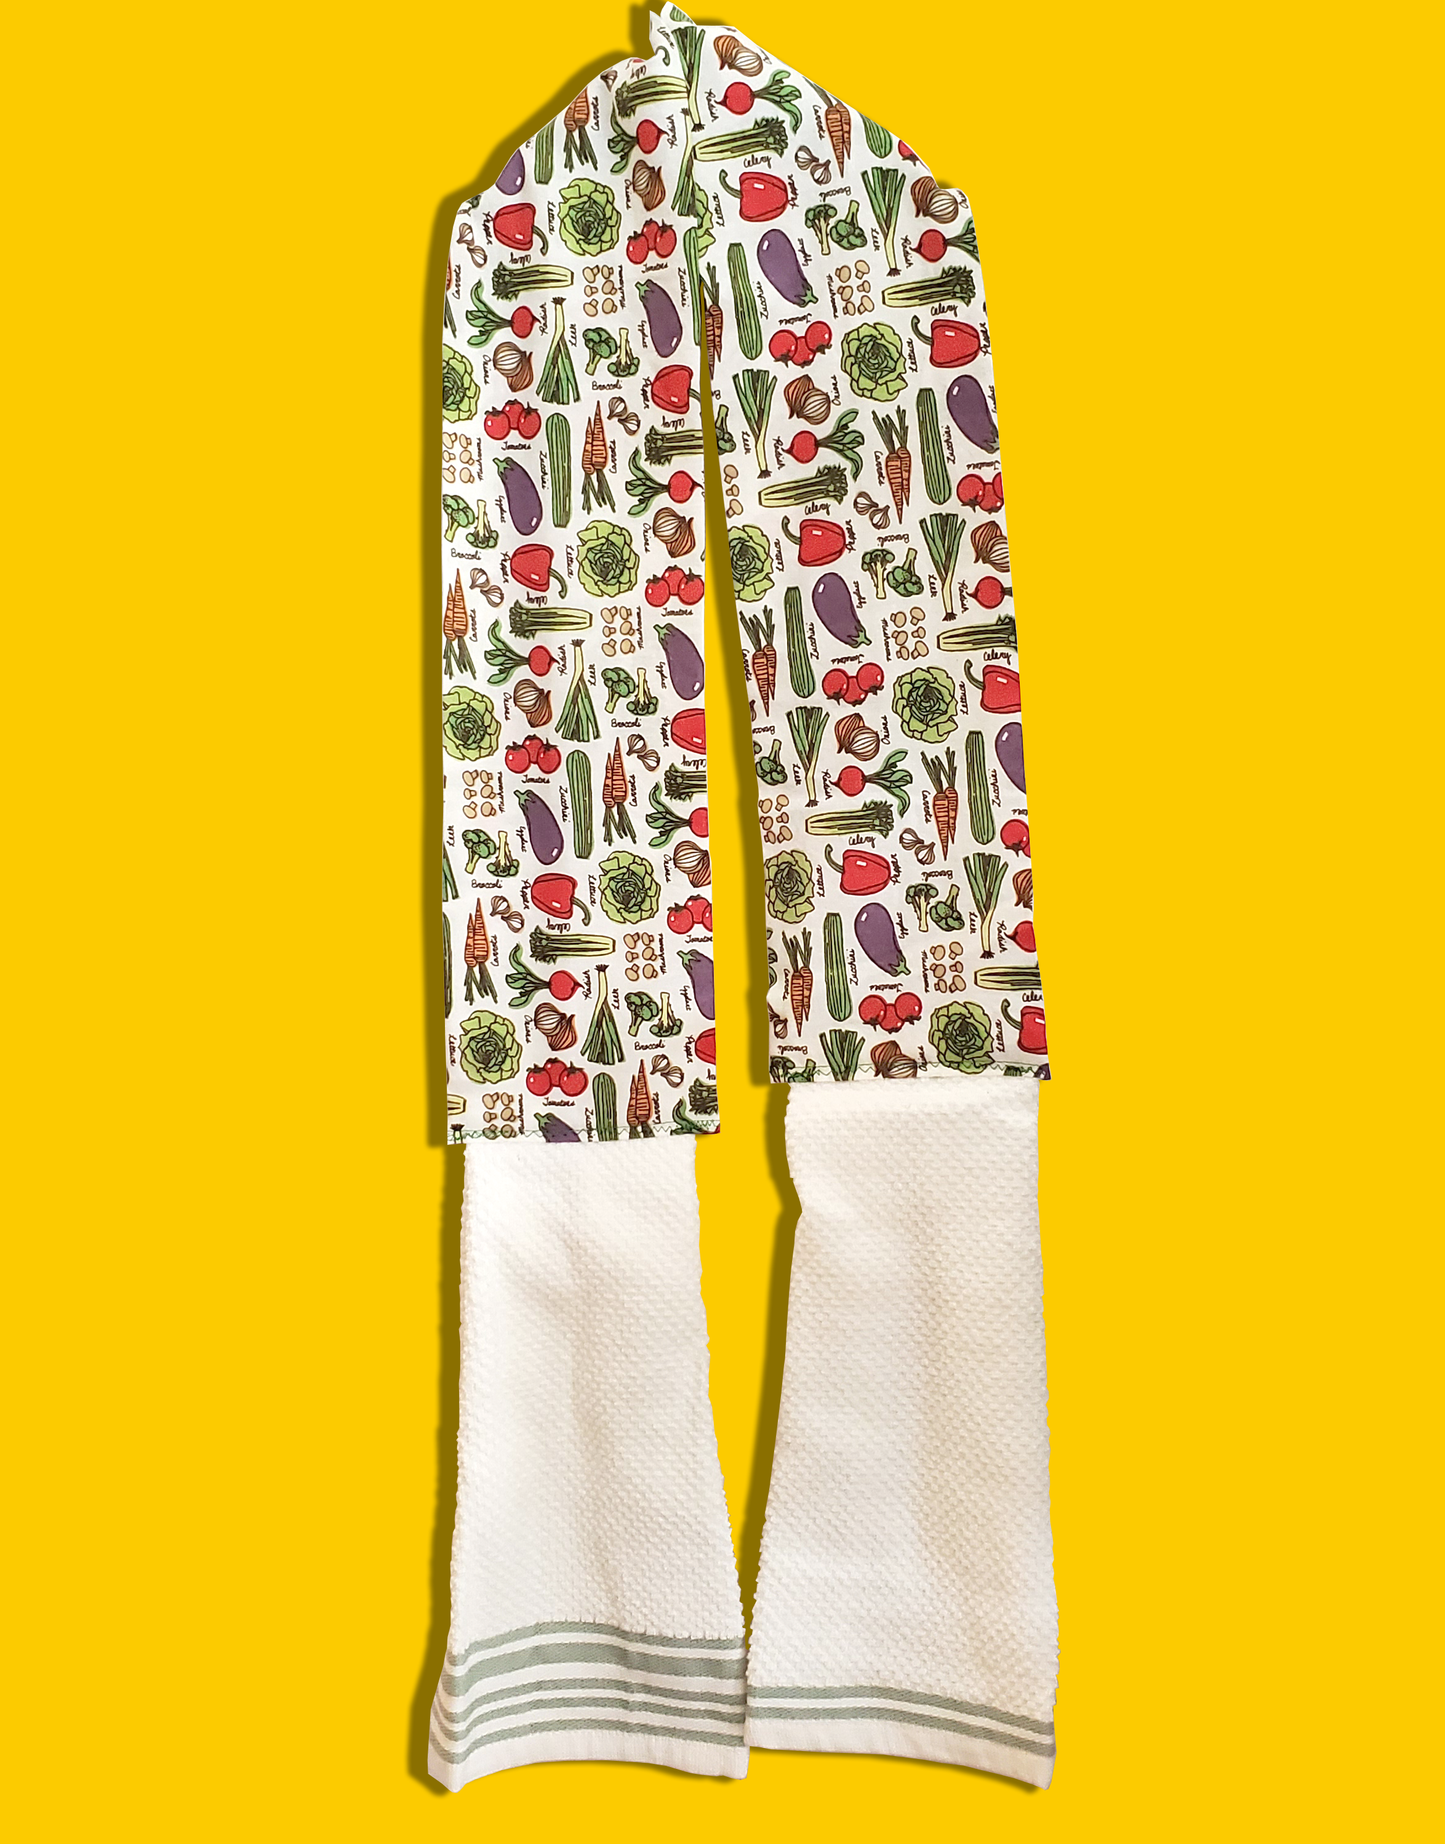 Vegetable print kitchen scarf with green striped towel